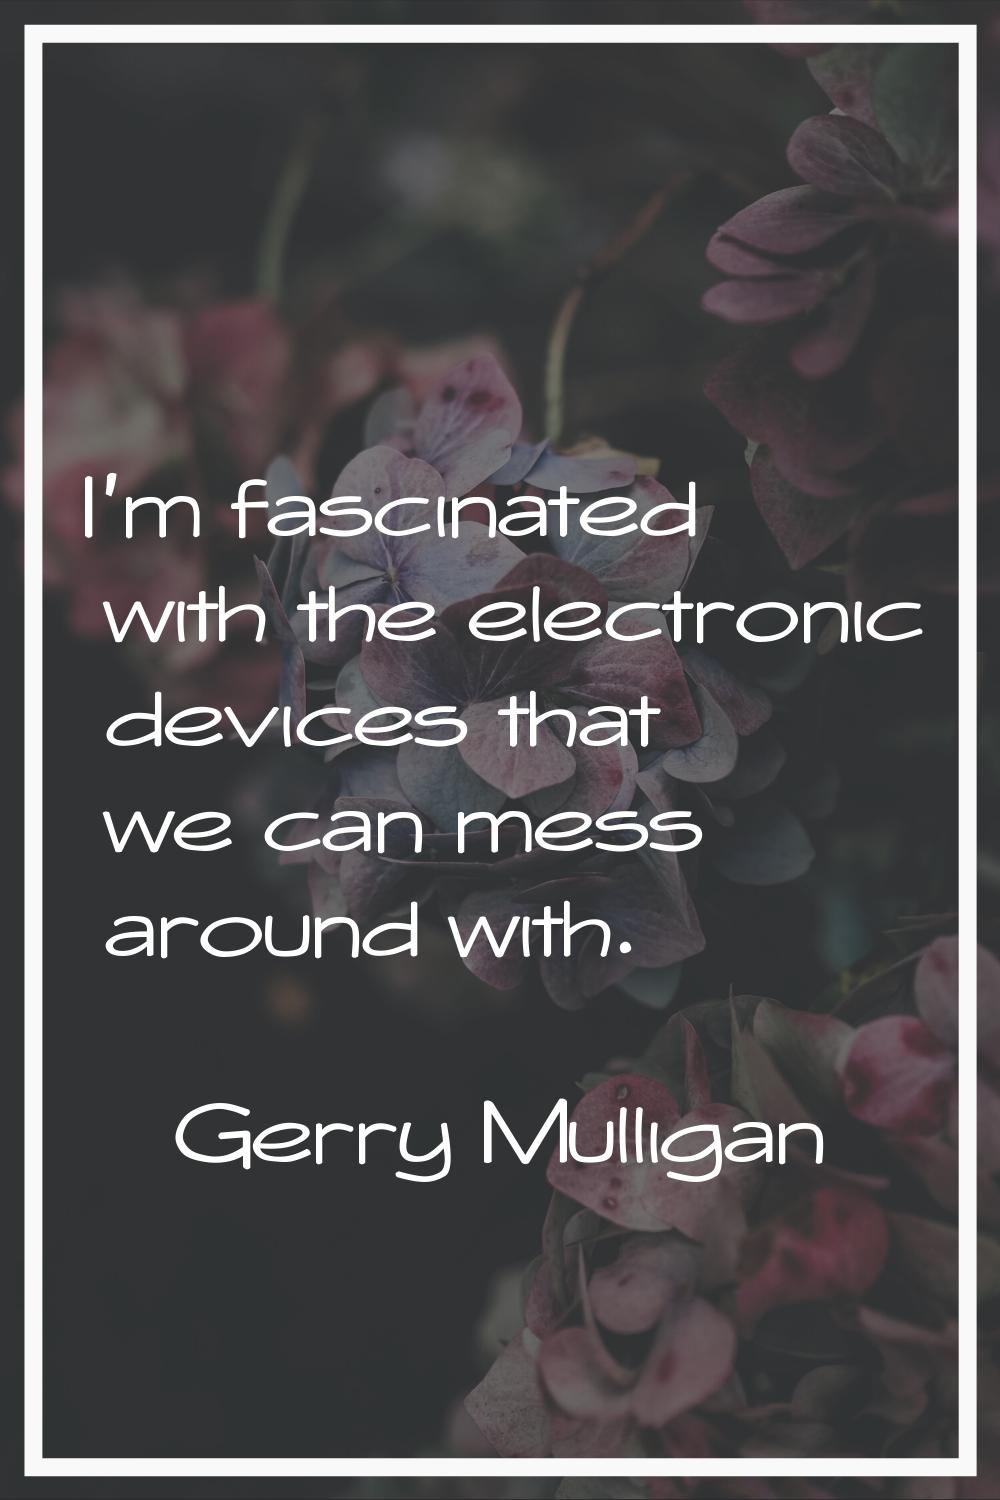 I'm fascinated with the electronic devices that we can mess around with.